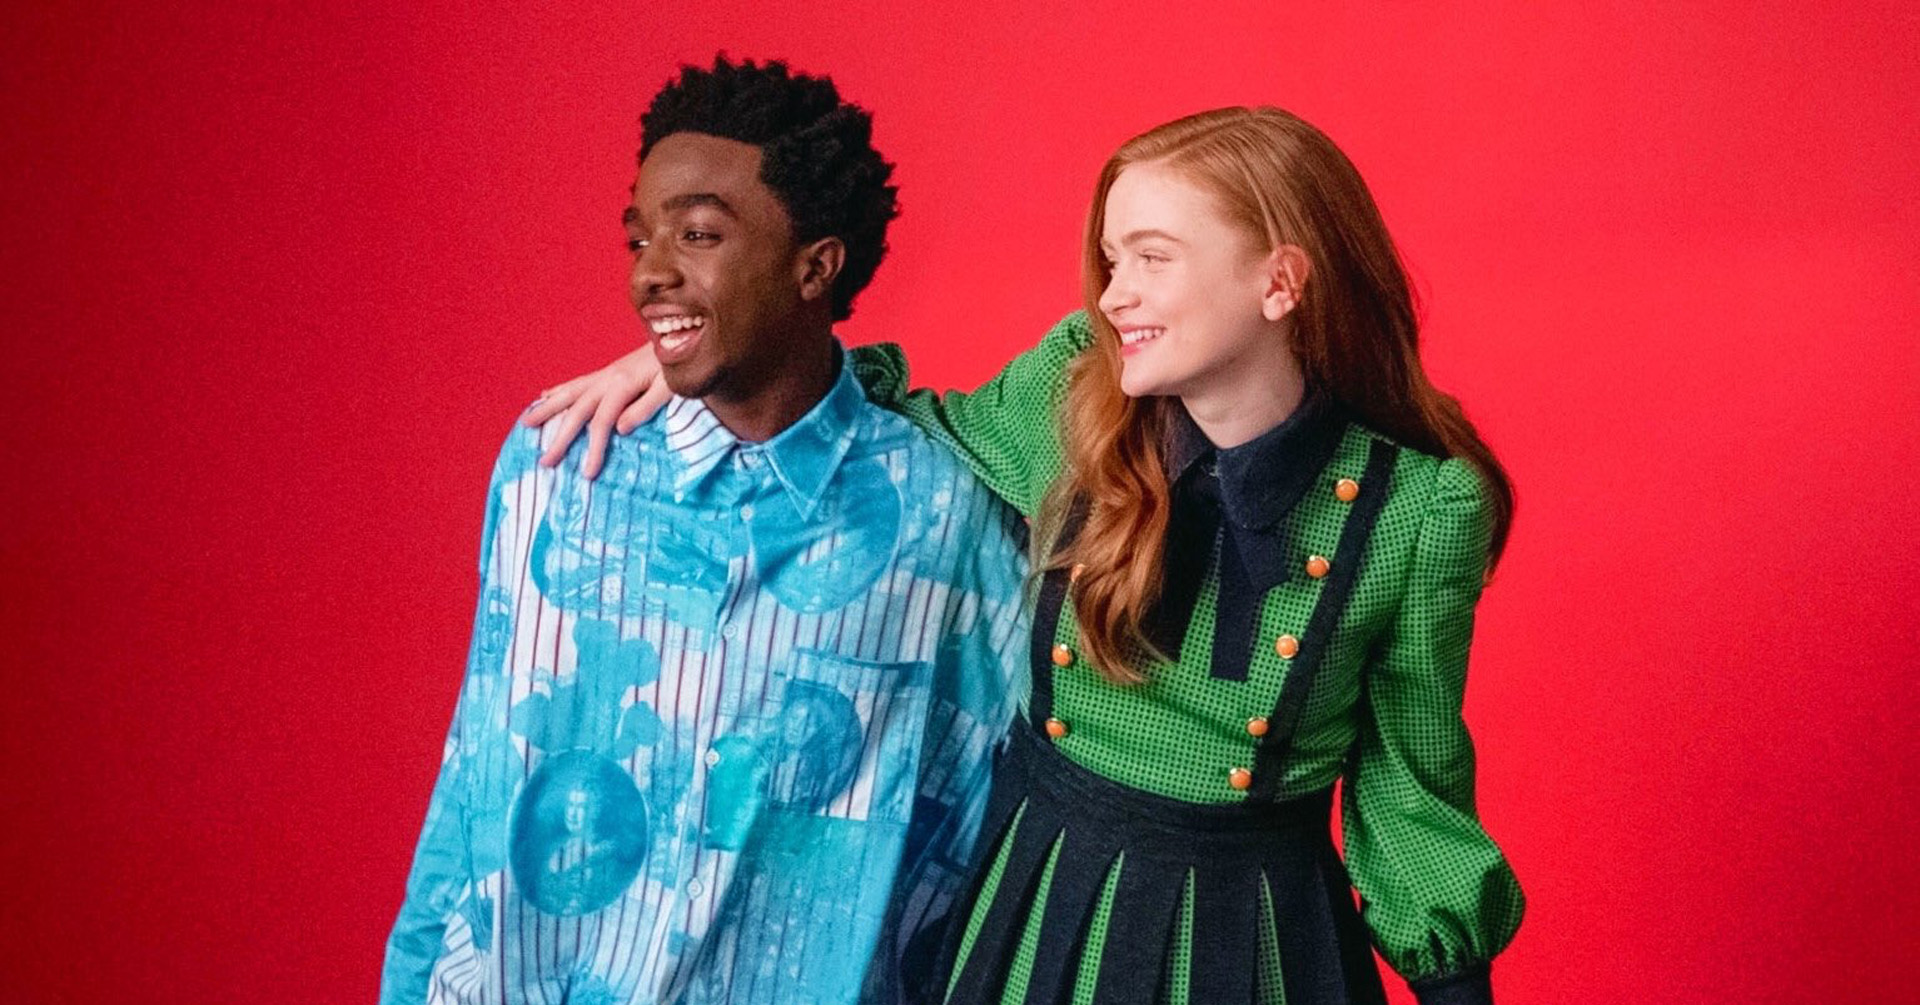 Sadie Sink and Caleb McLaughlin during a photoshoot.